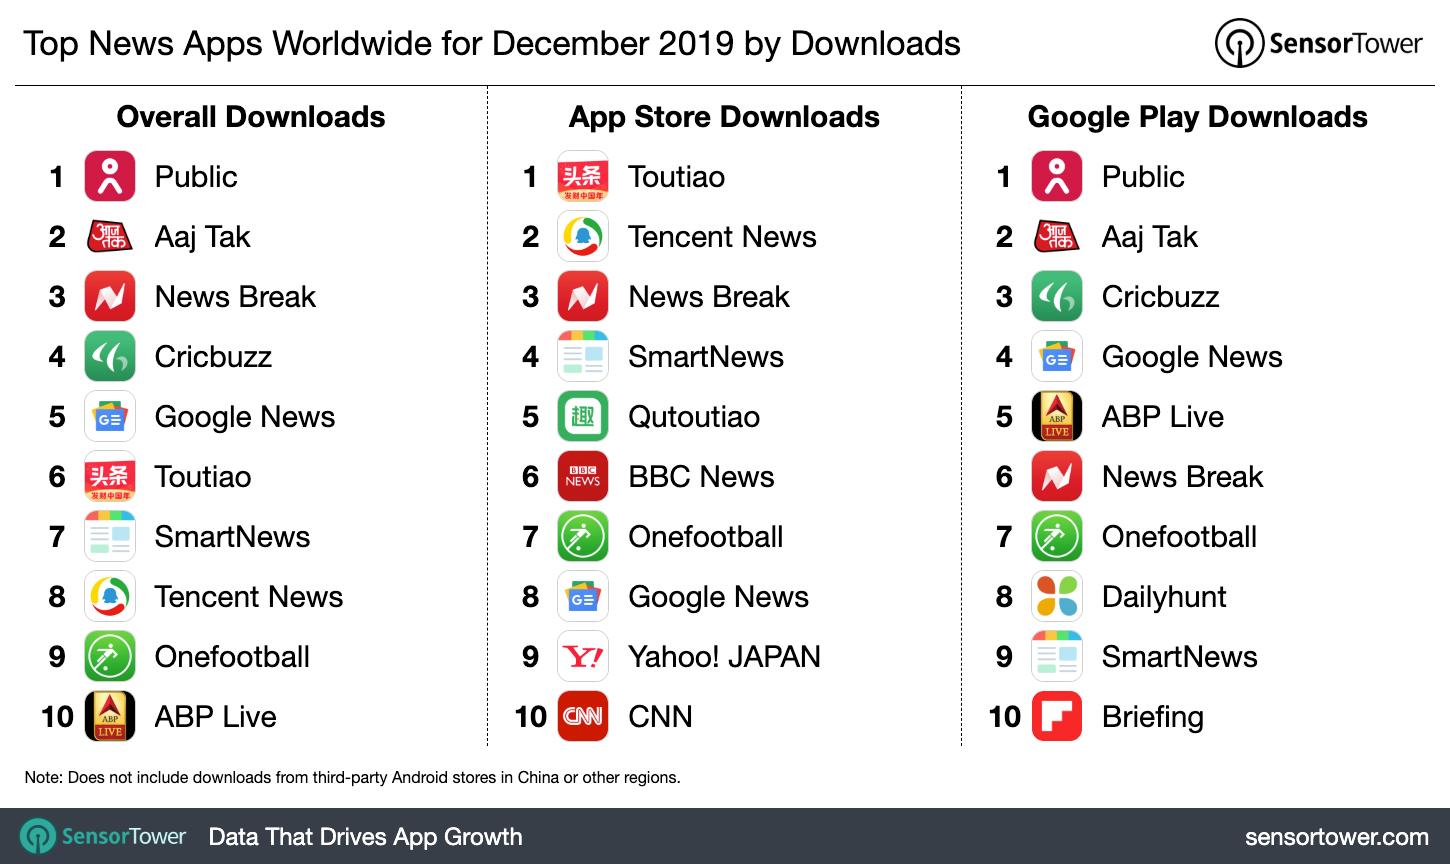 Top News Apps Worldwide for December 2019 by Downloads